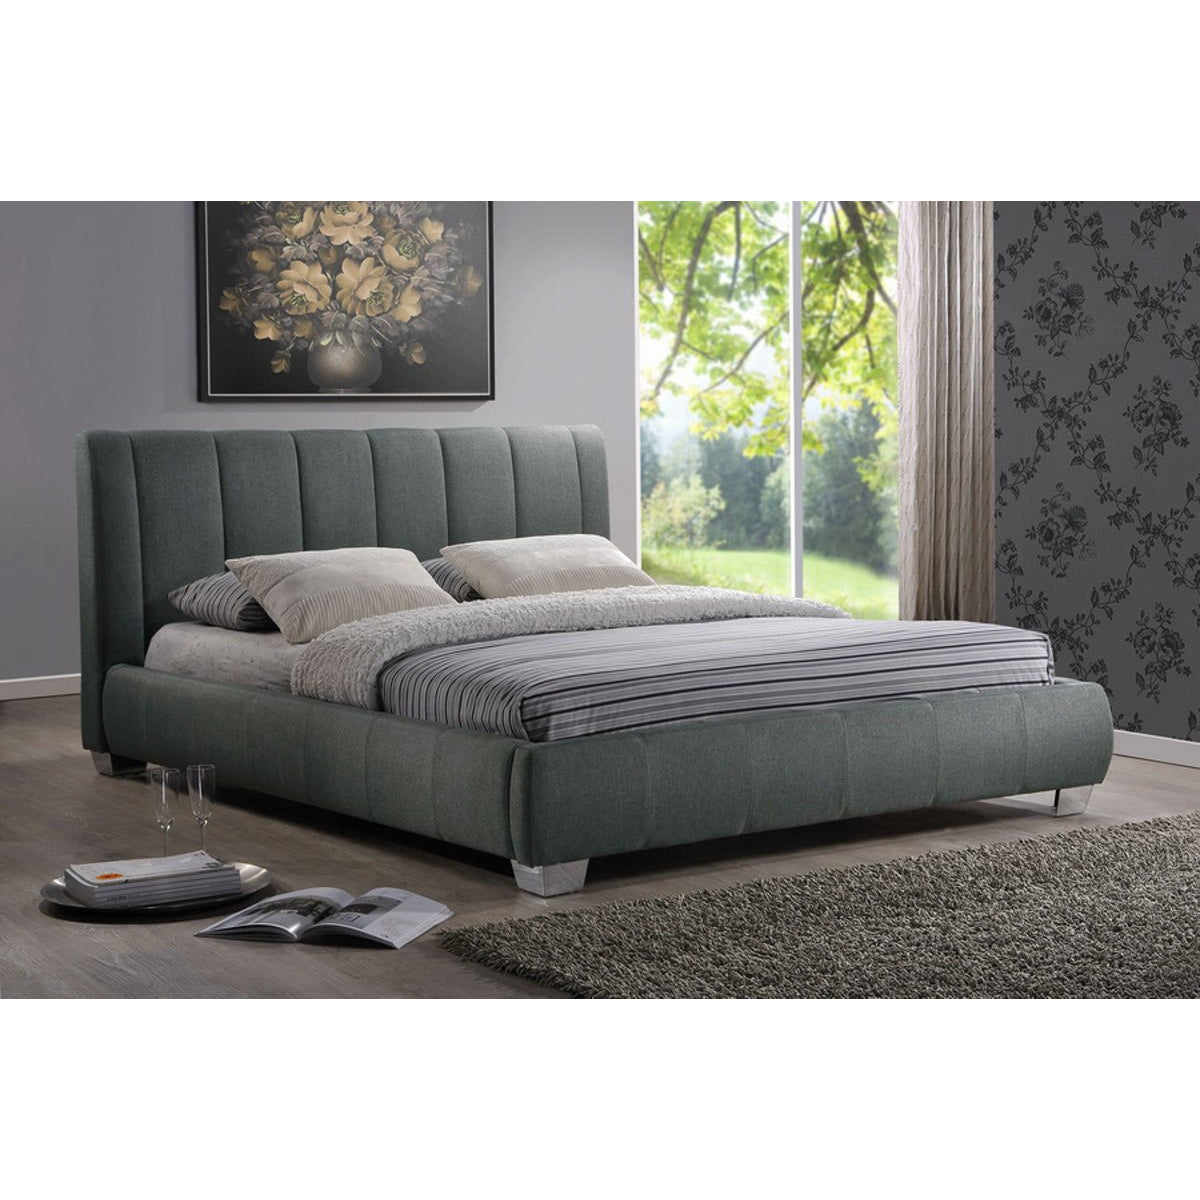 Baxton Studio Marzenia Contemporary Grey Fabric Queen Size Bed Baxton Studio-beds-Minimal And Modern - 1